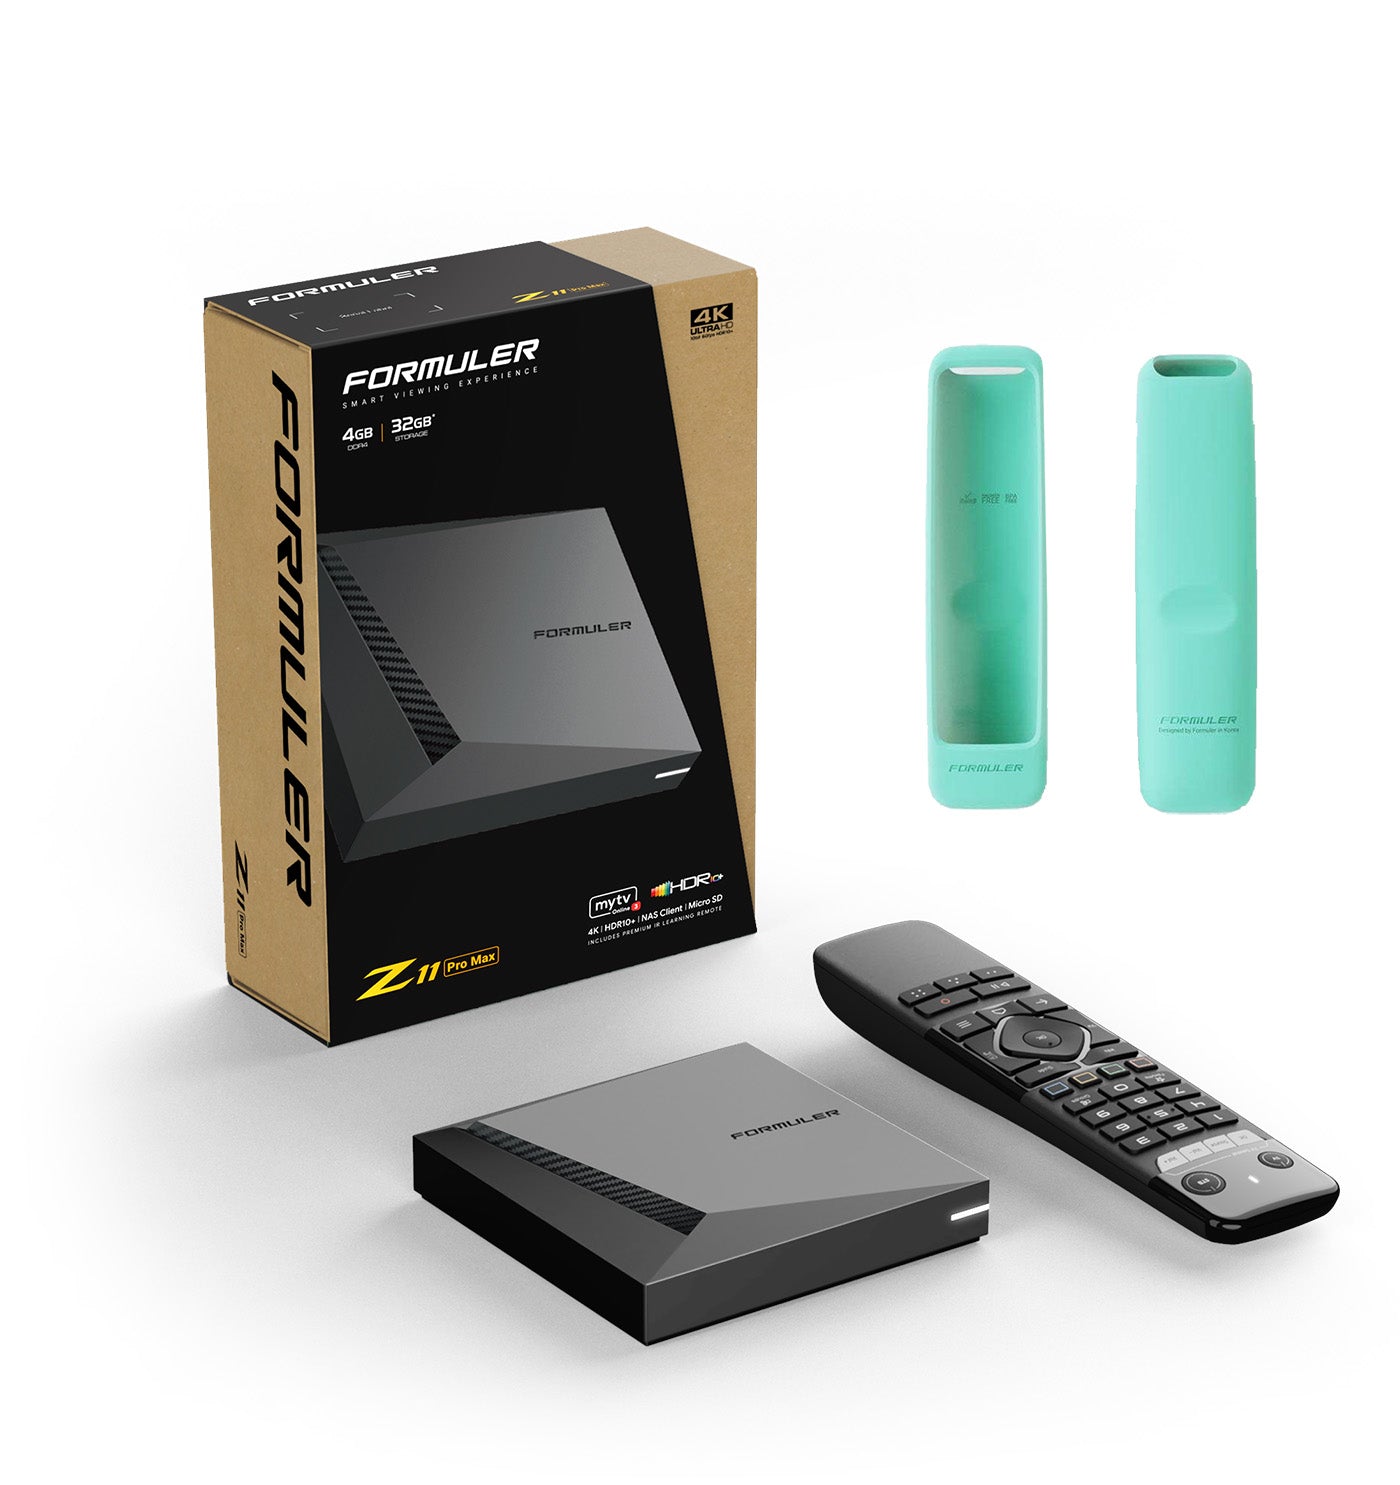 Formuler Z11 Pro Max + FREE ACCESSORY: 1x turquoise remote cover